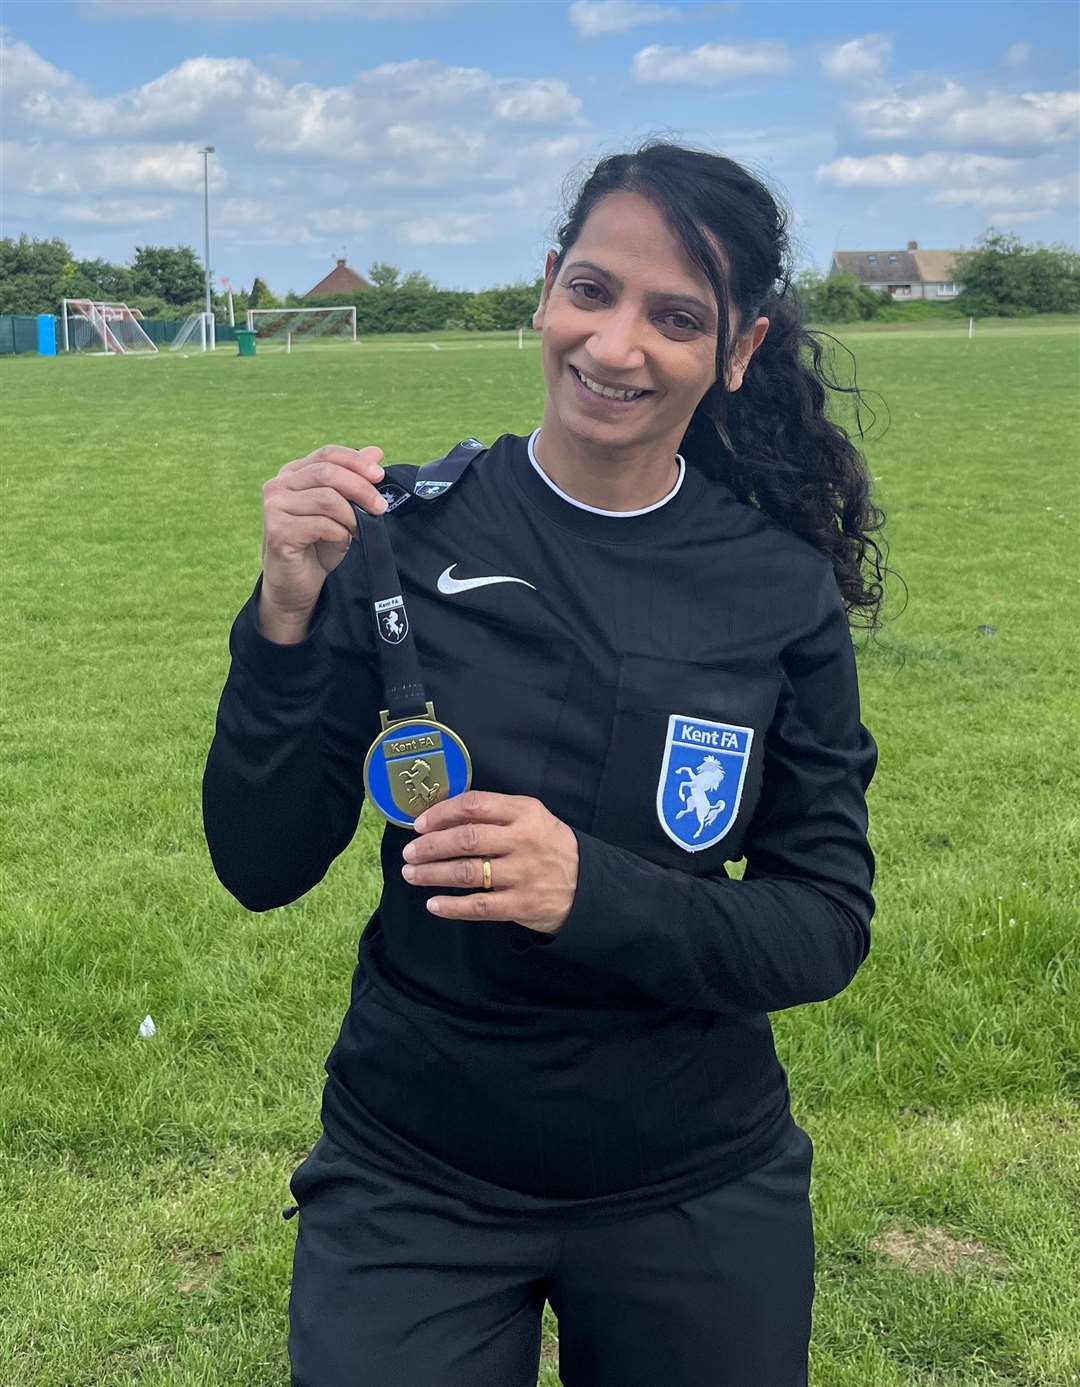 Rashpal Shergill is the first South Asian female to ever referee in the Kent County Cup finals